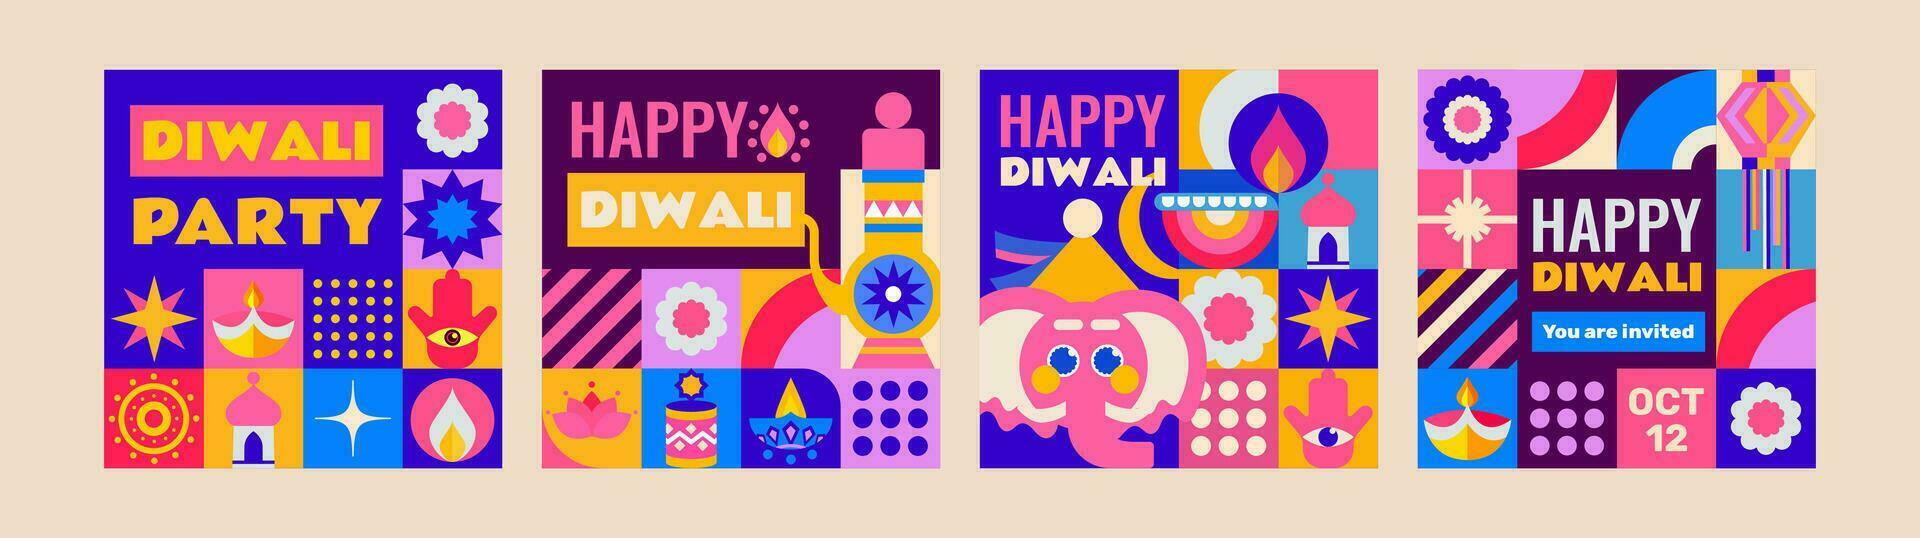 4 templates for the Diwali holiday in mosaic style. Bright, modern set with festive elements. The design will perfectly complement your project. vector